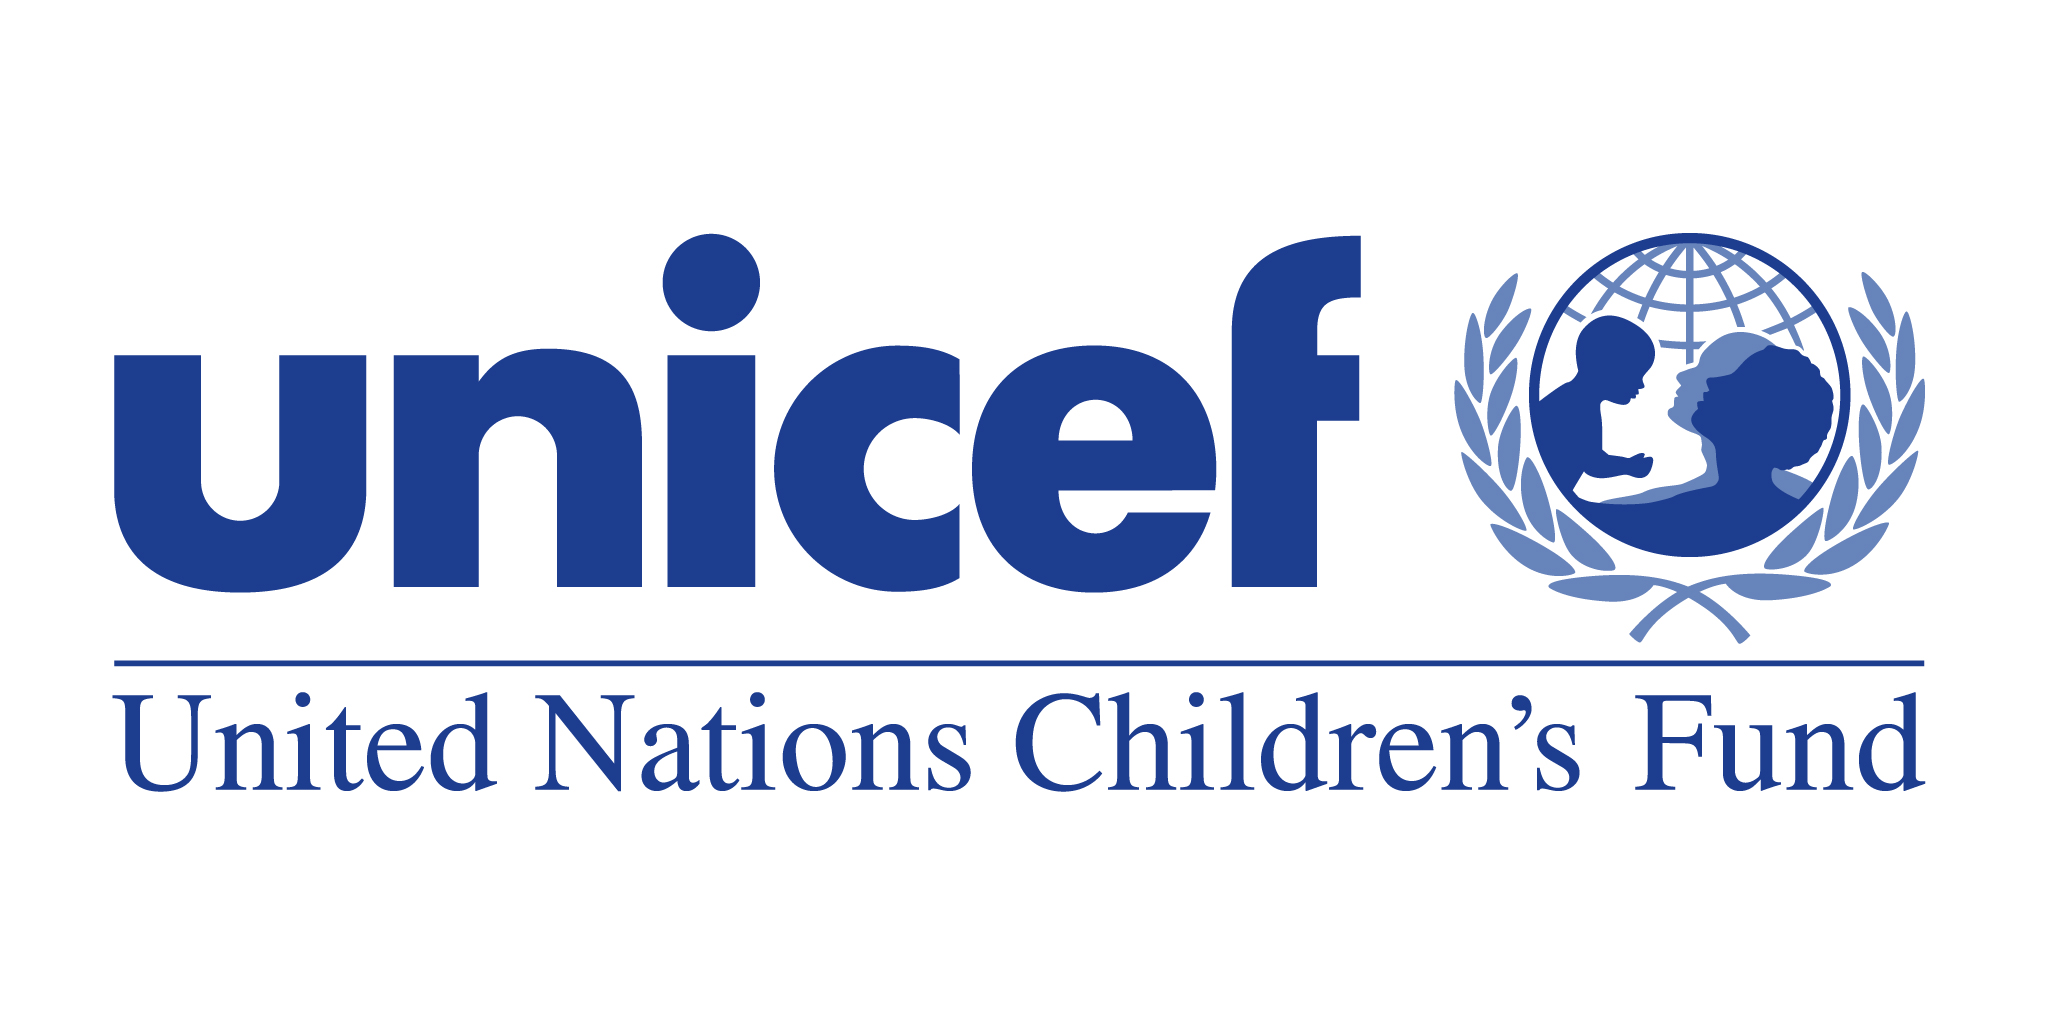 Unicef Logo / Download Wallpapers Flag Of The Unicef Symbols Unicef ...